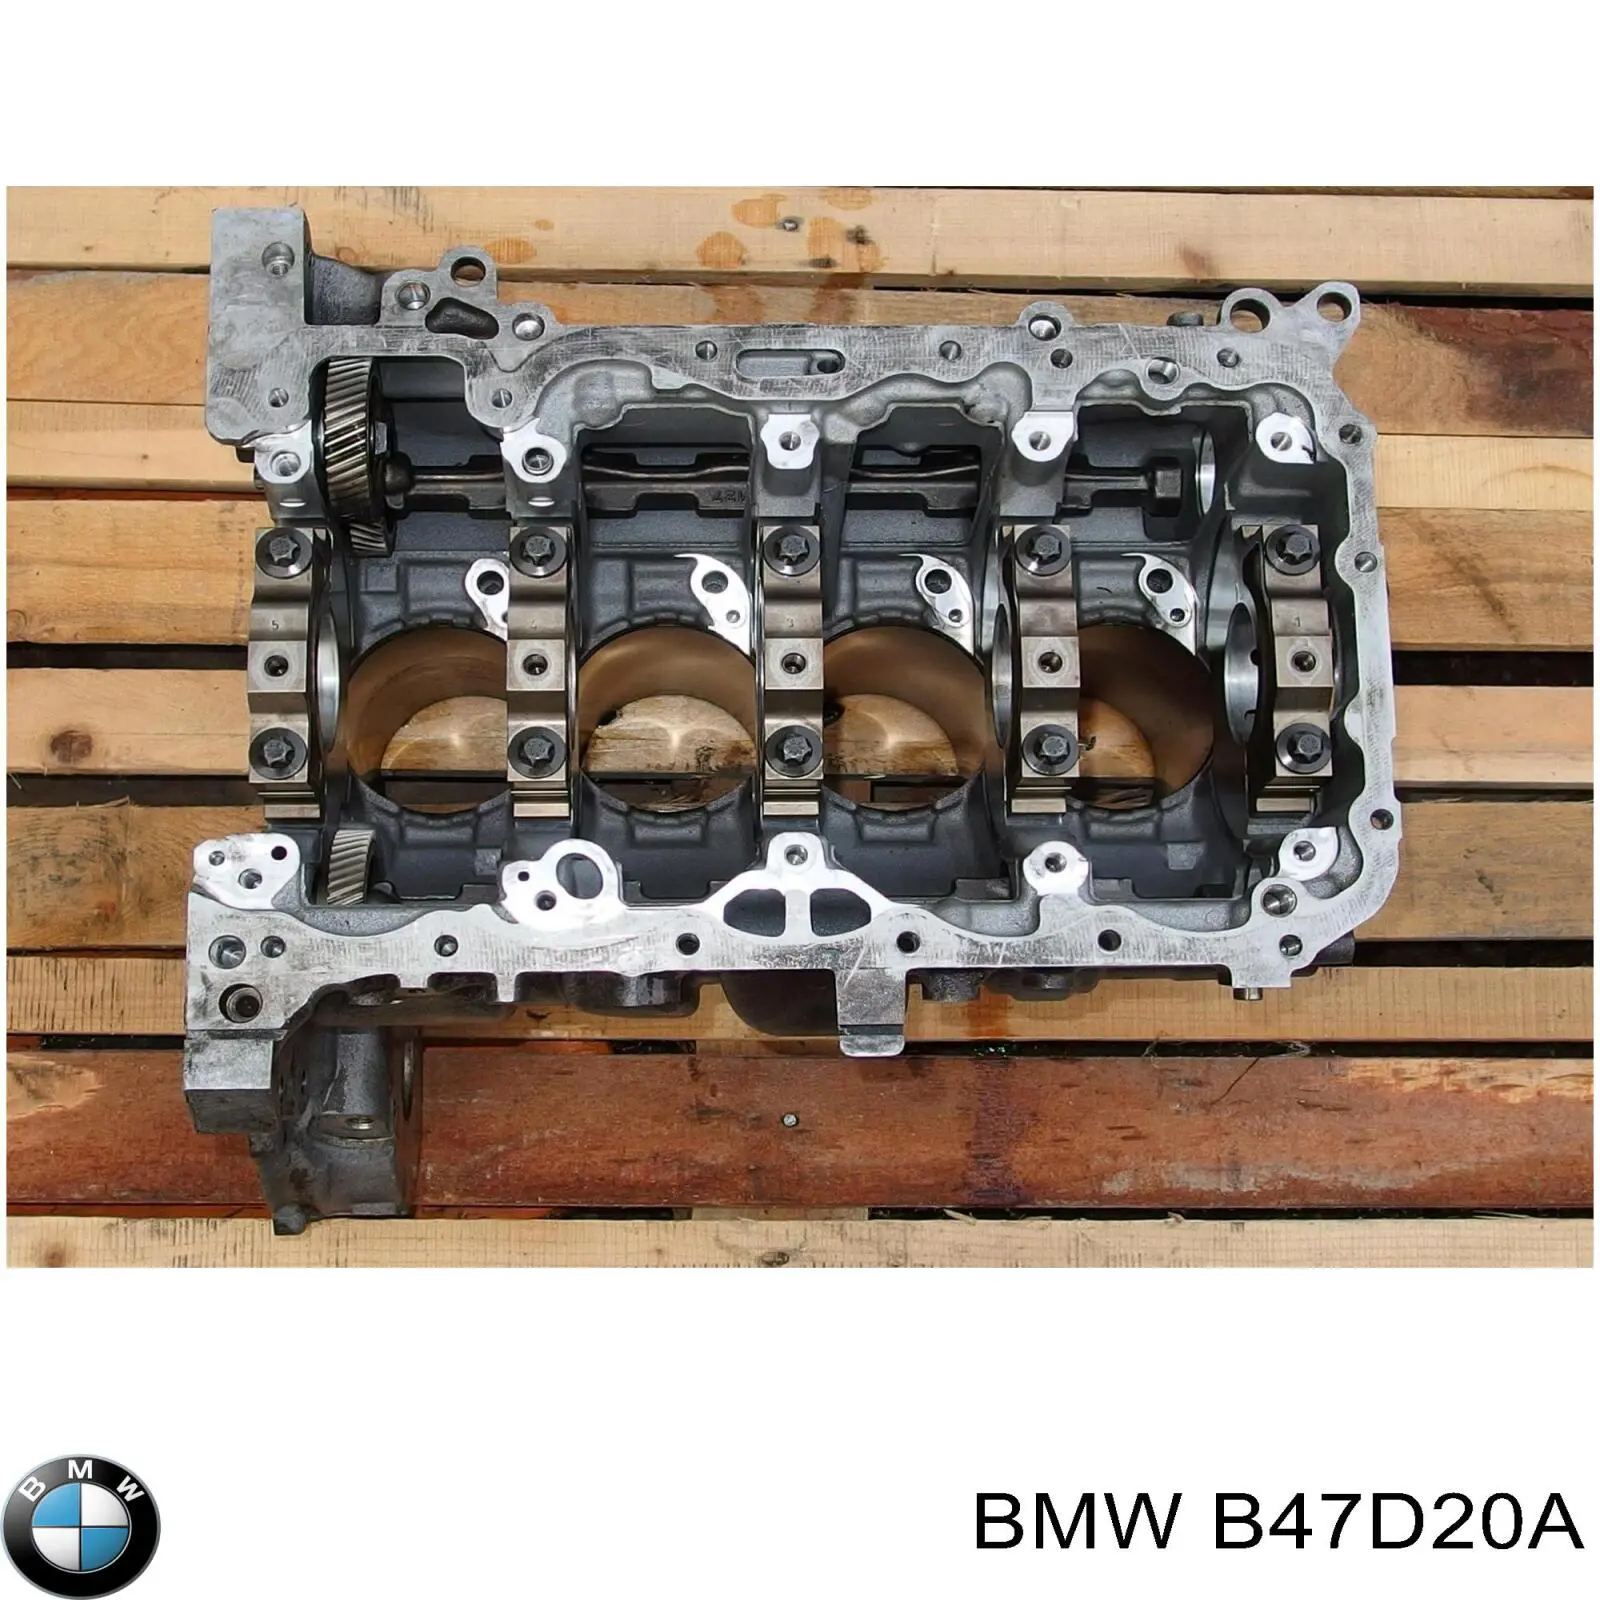 Motor completo BMW B47D20A